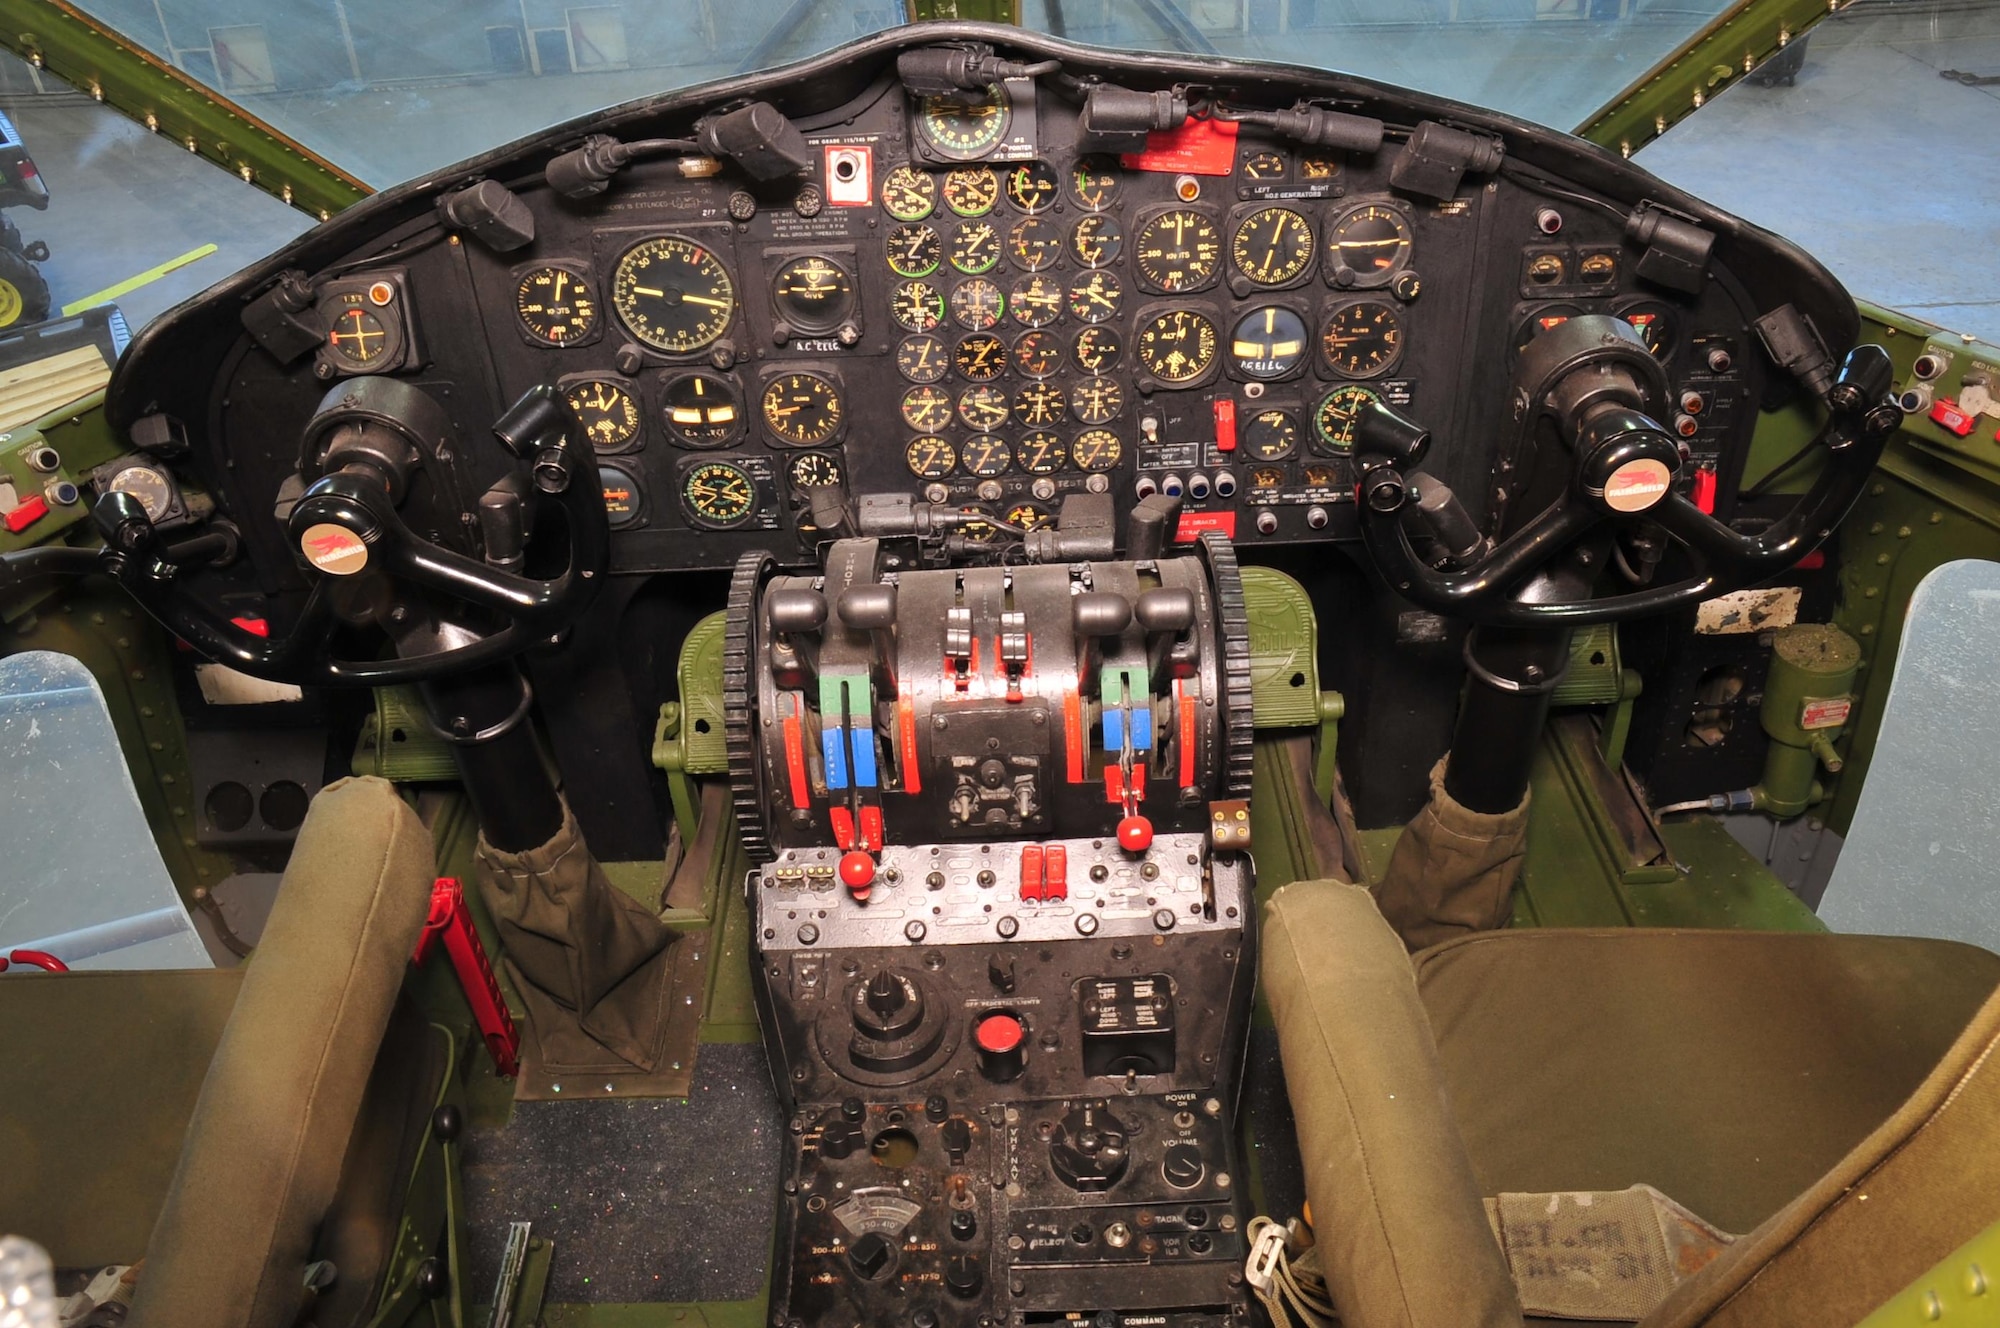 DAYTON, Ohio -- Fairchild C-119J Flying Boxcar cockpit view at the National Museum of the United States Air Force. (U.S. Air Force photo by Ken LaRock)